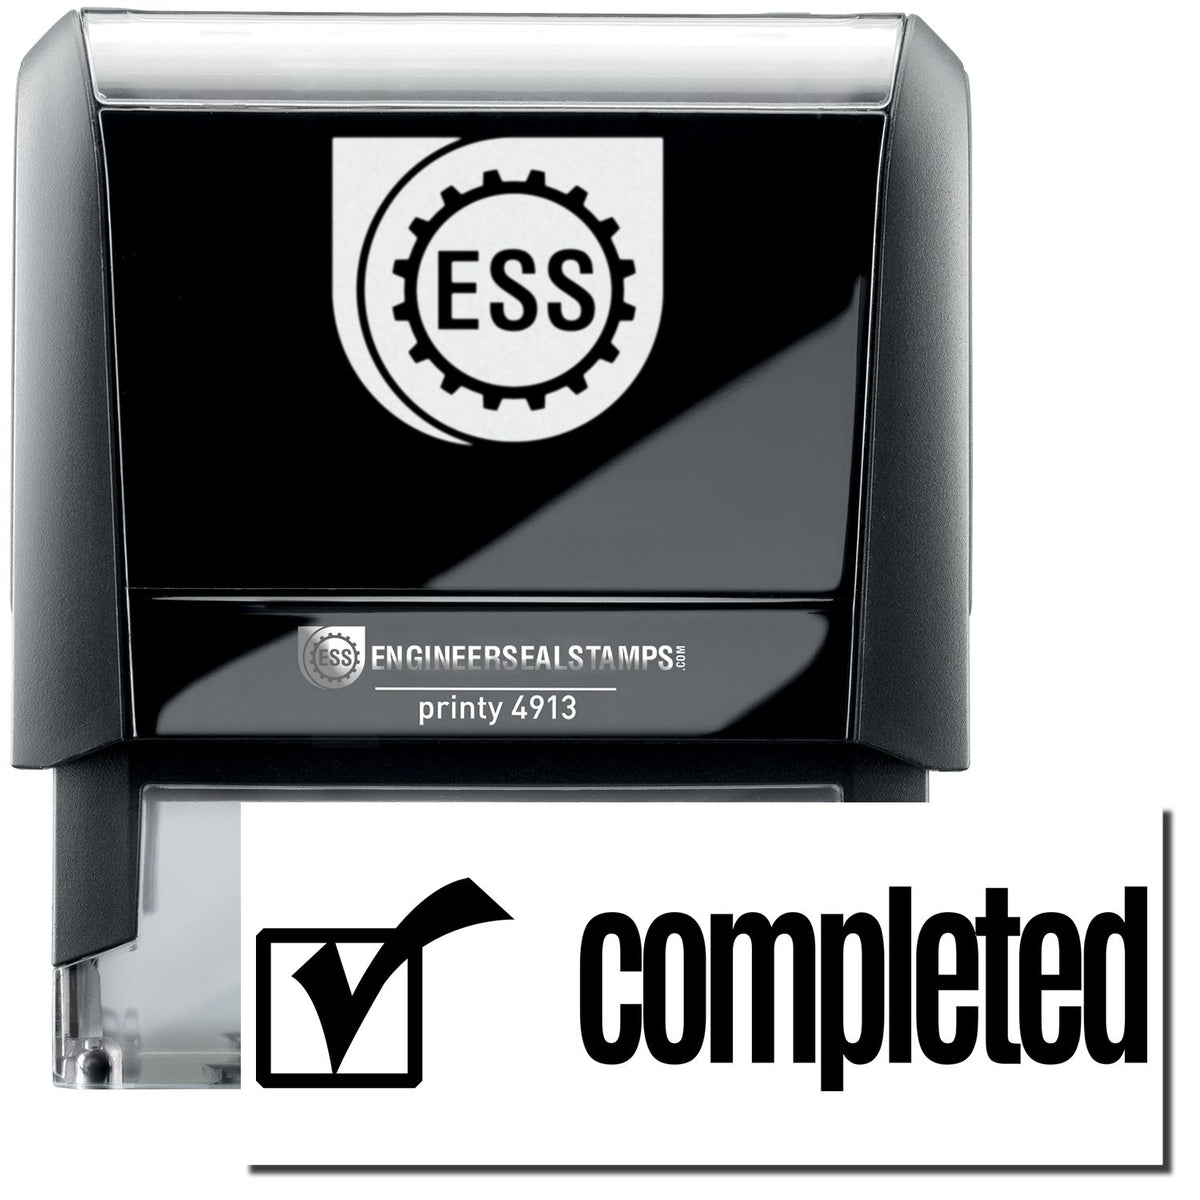 A self-inking stamp with a stamped image showing how the text &quot;completed&quot; in a large font with an image of a checkbox on the left side is displayed after stamping.